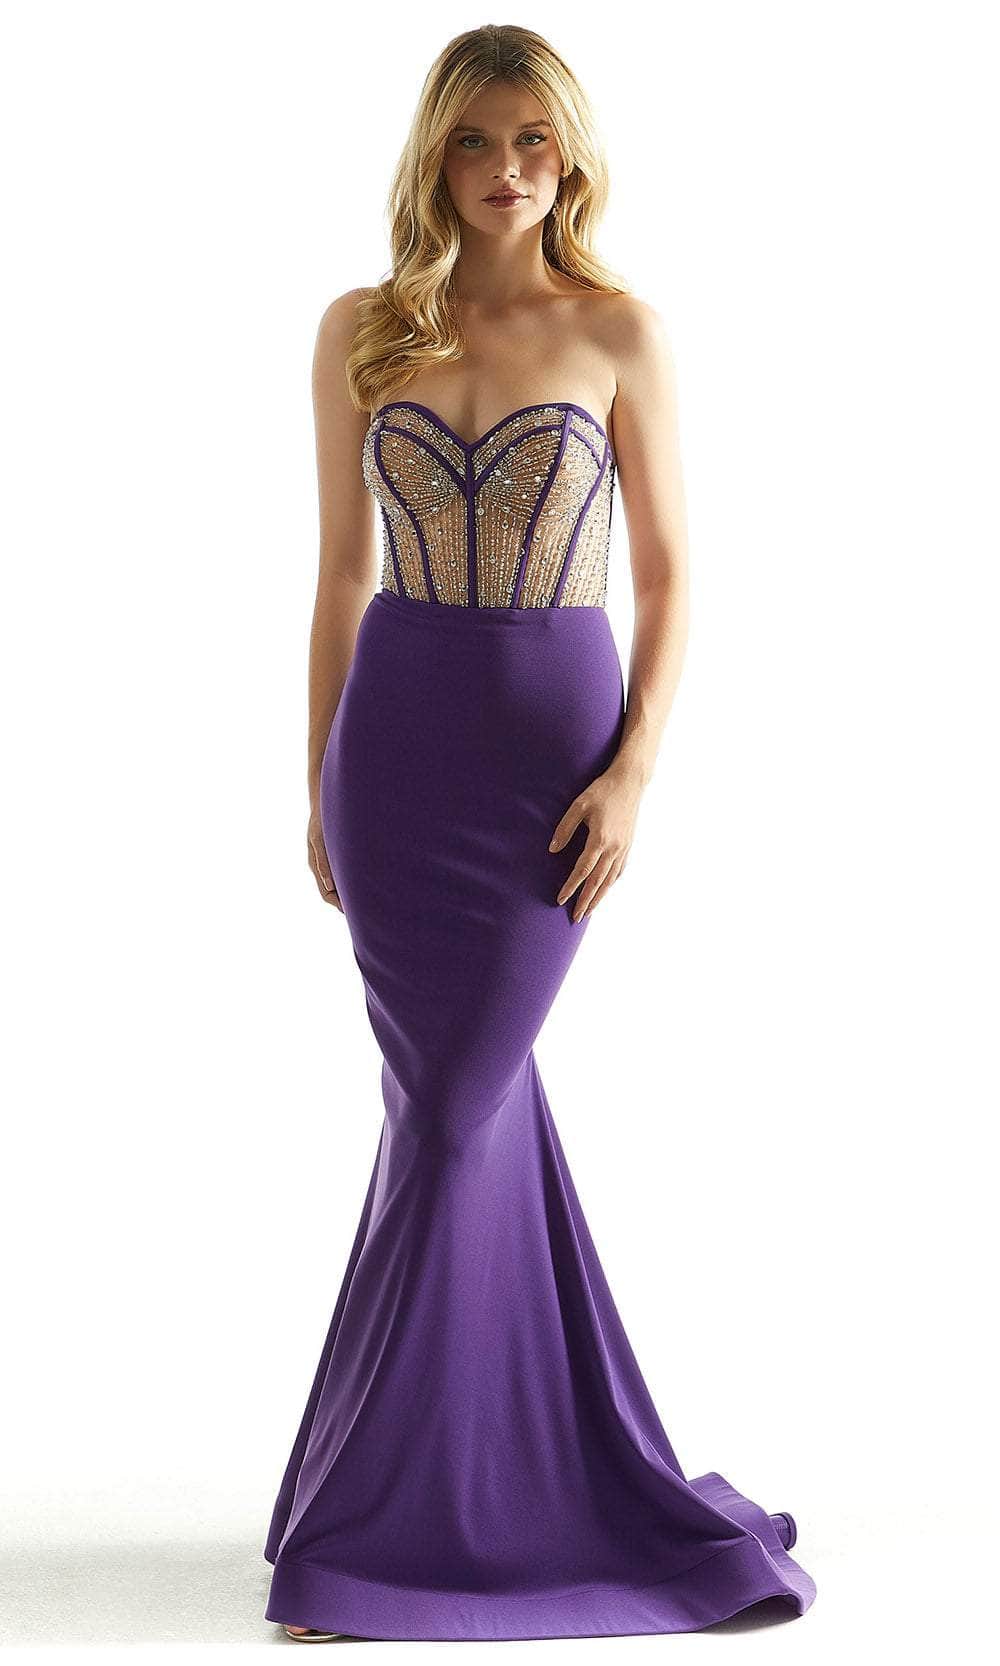 Mori Lee 49035 - Crystal Beads Fitted Prom Dress
